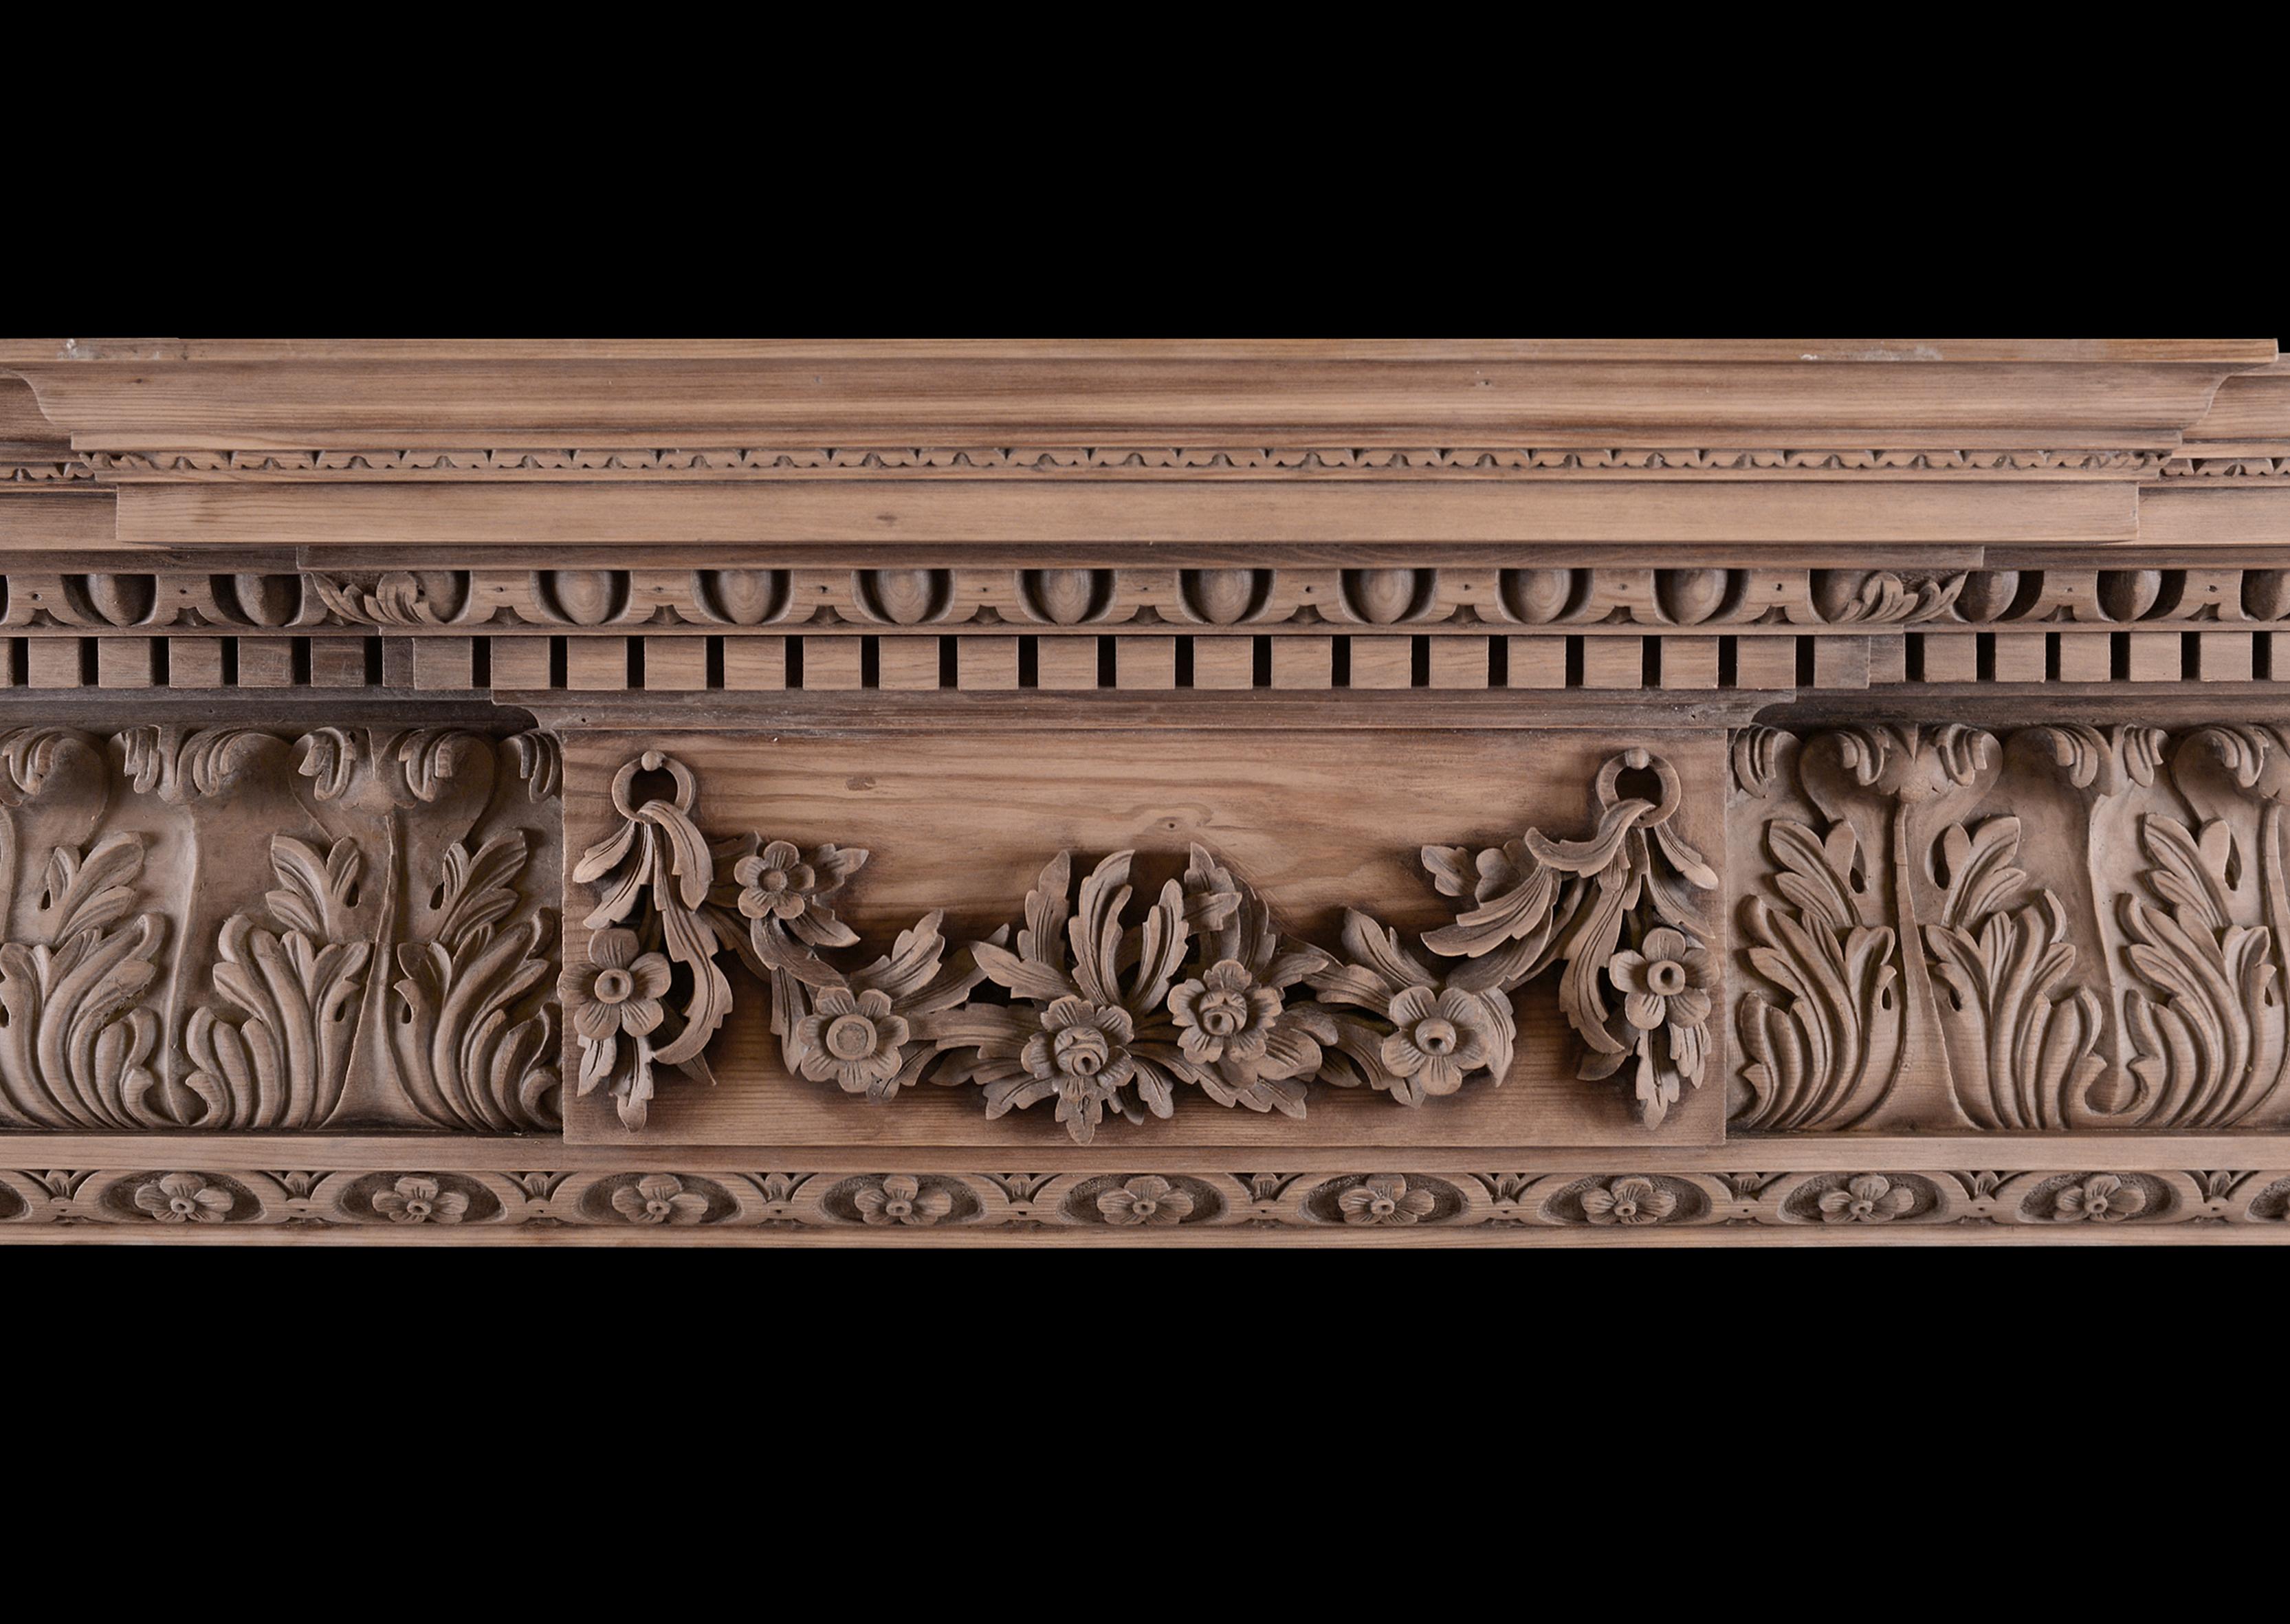 A carved pine fireplace in the Georgian manner. The break-leg jambs carved with flower petals, surmounted by acanthus leaf frieze with centre blocking featuring carved swags and flowers. The breakfront shelf with dentils and egg-and-tongue